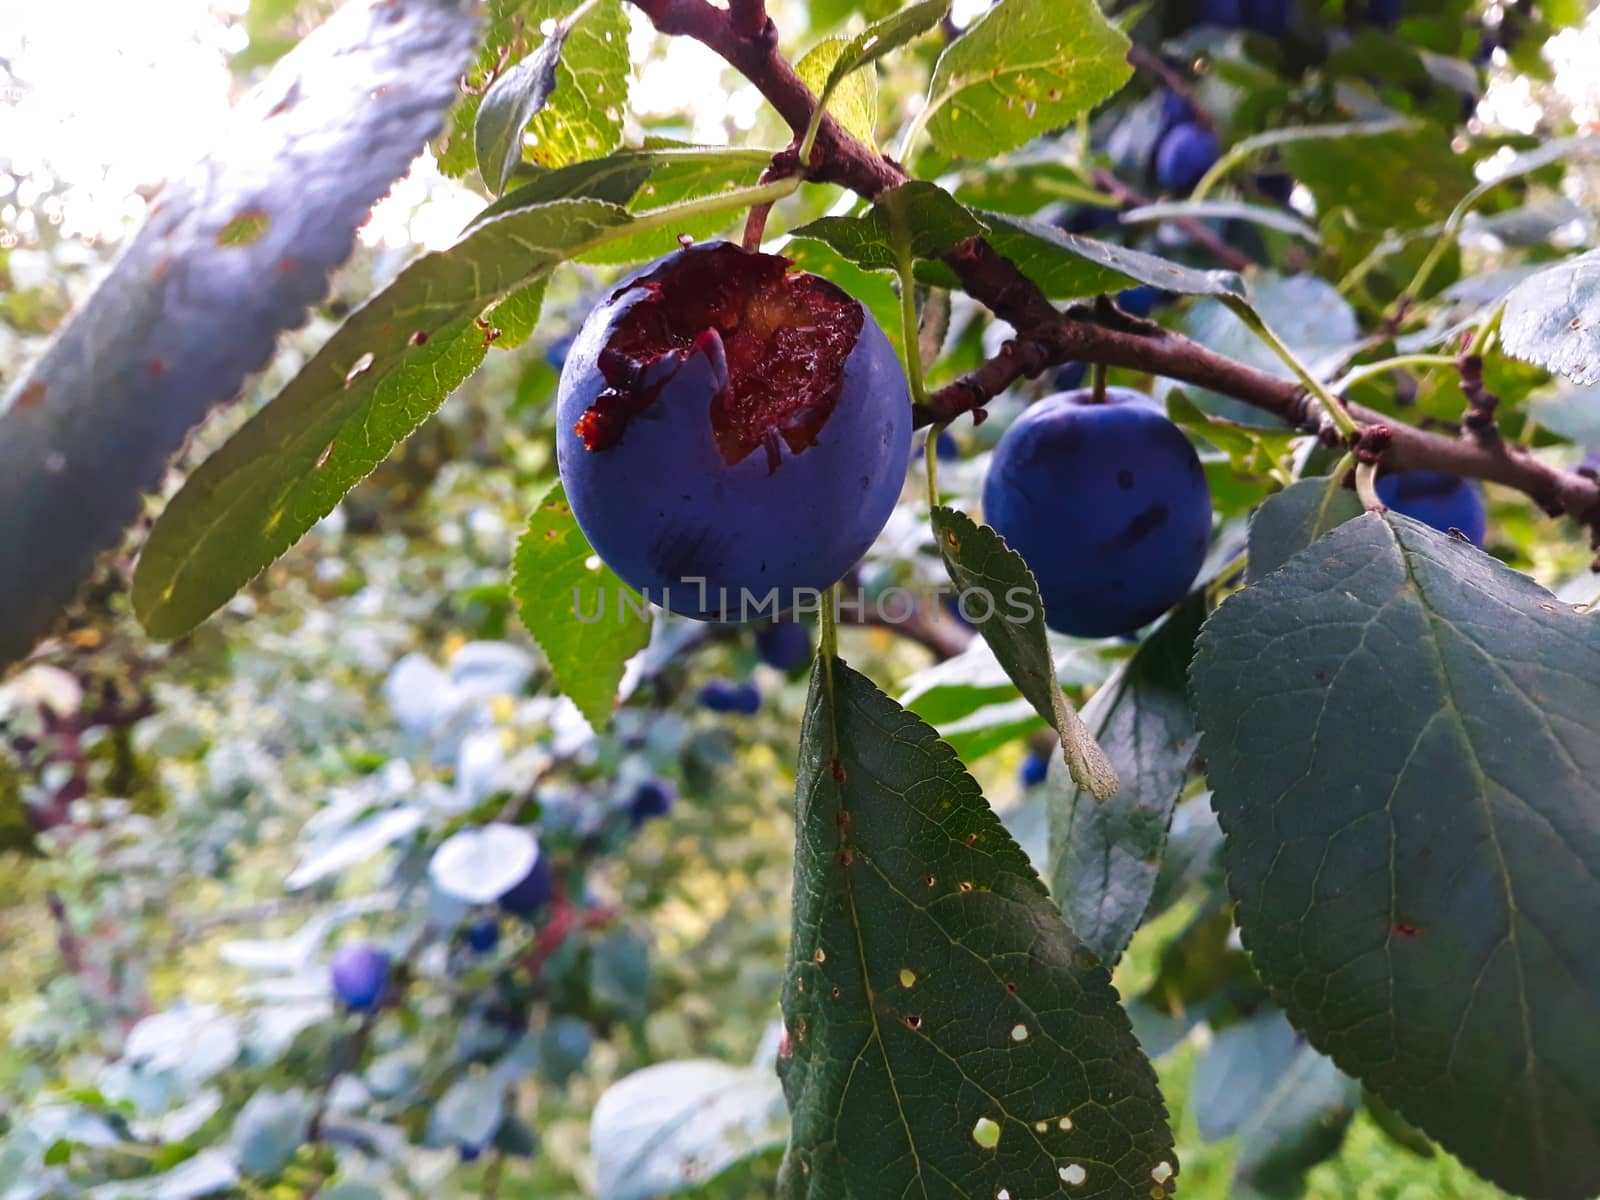 A ripe and scarred plum eaten by a bird. by mahirrov